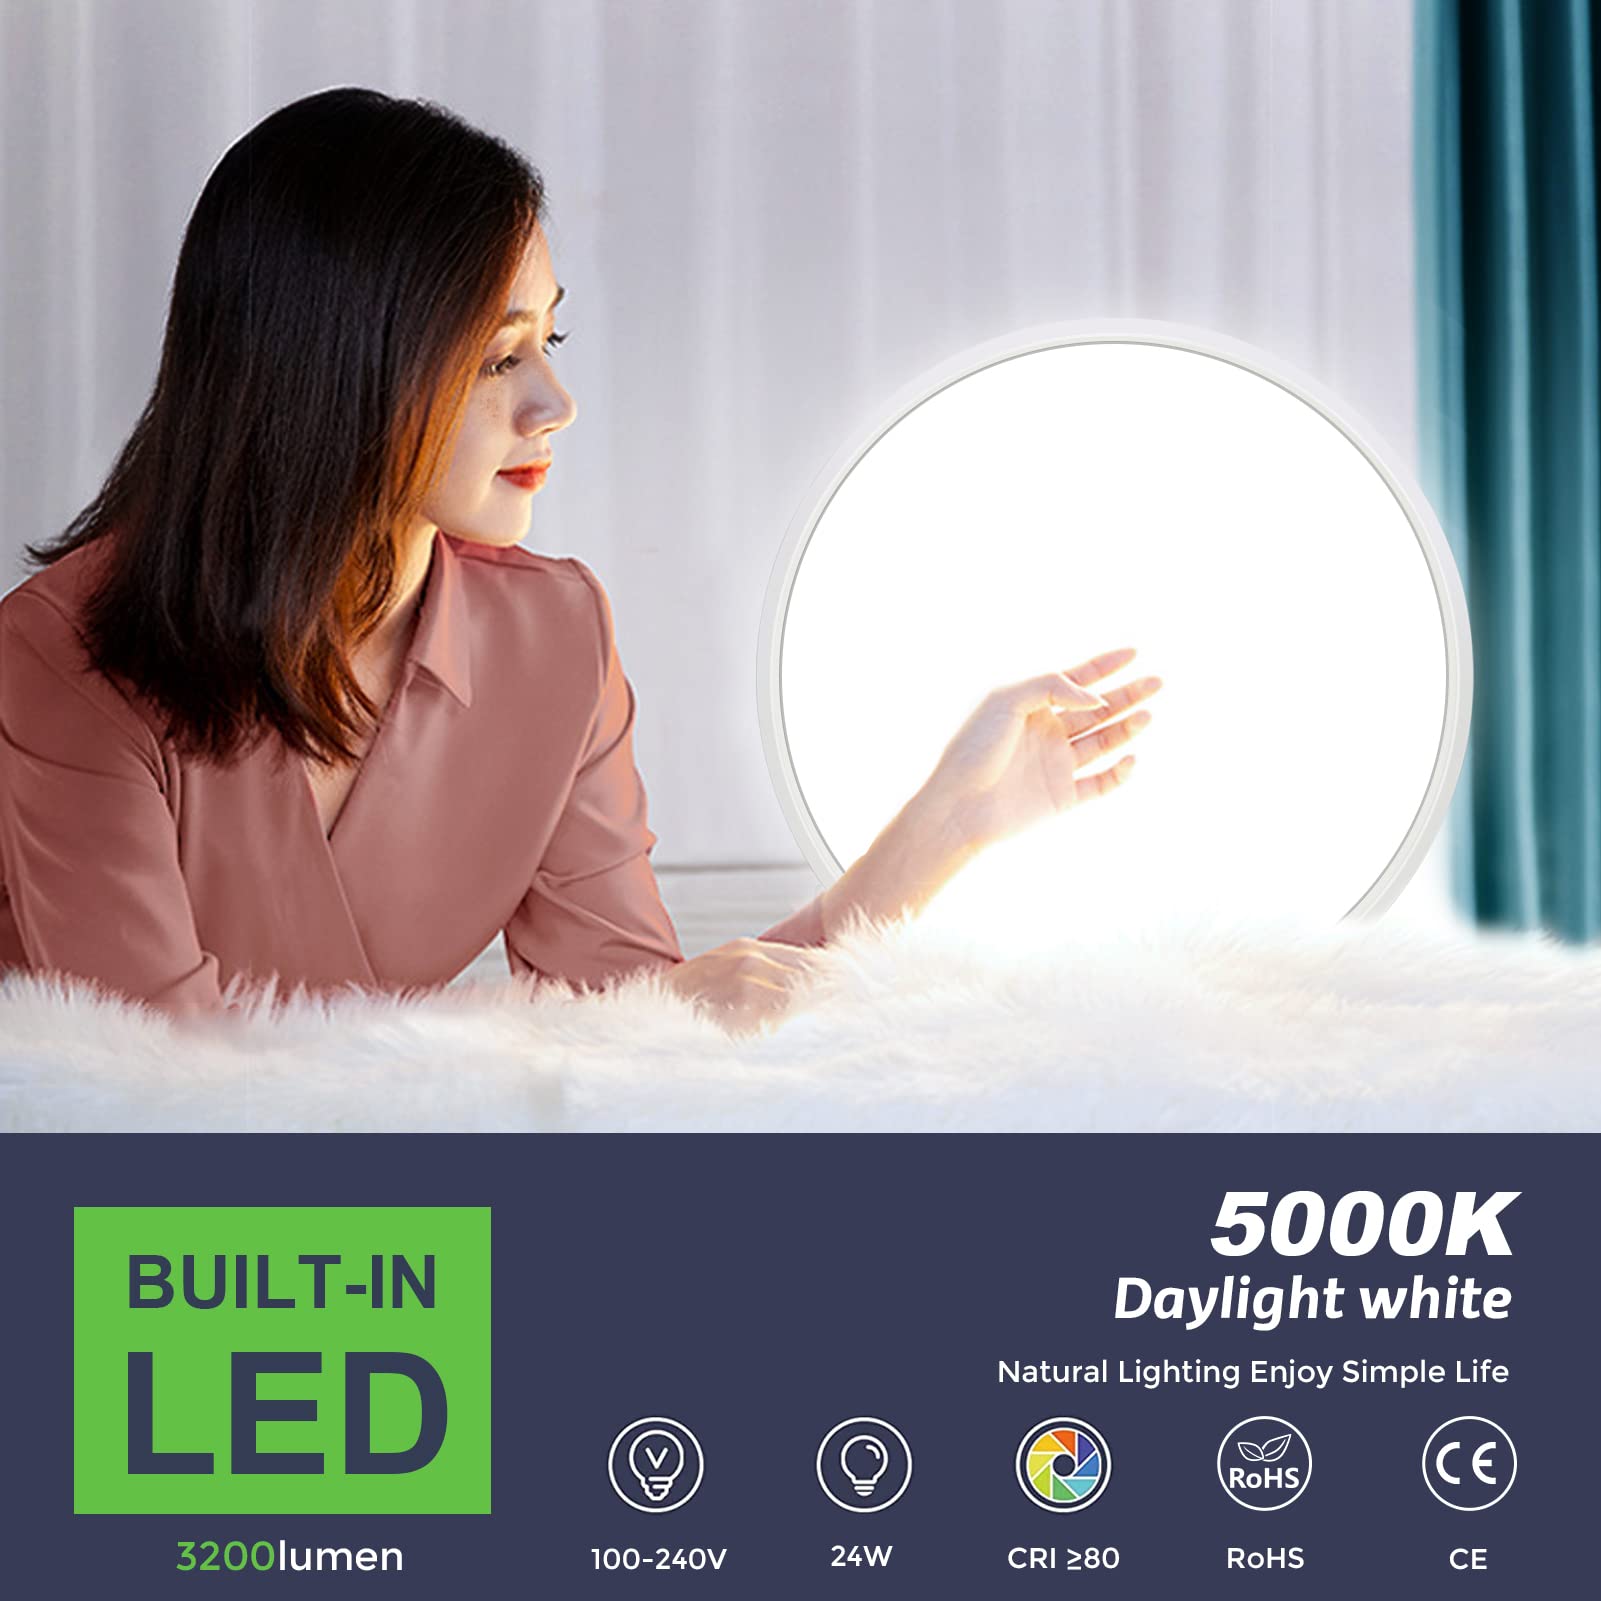 12 Inch LED Flush Mount Ceiling Light Fixture, 5000K Daylight White, 3200LM, 24W, Flat Modern Round Lighting Fixture, 240W Equivalent White Ceiling Lamp for Kitchens, Stairwells, Bedrooms.etc.